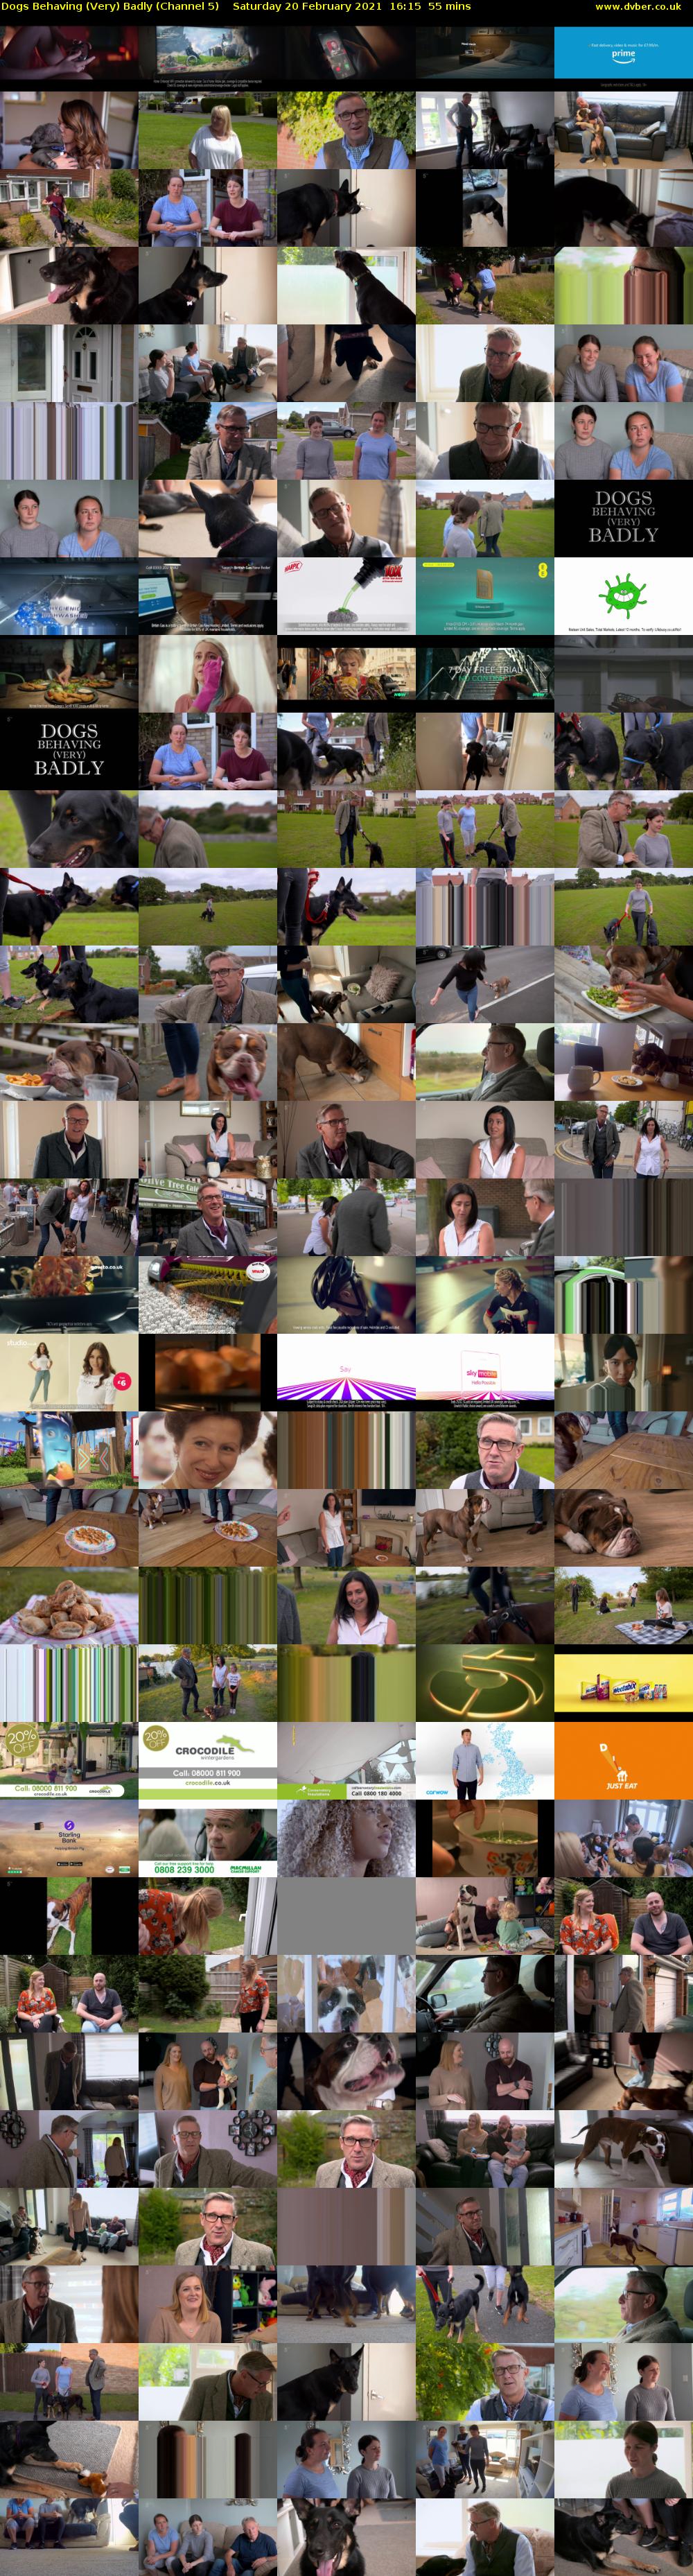 Dogs Behaving (Very) Badly (Channel 5) Saturday 20 February 2021 16:15 - 17:10